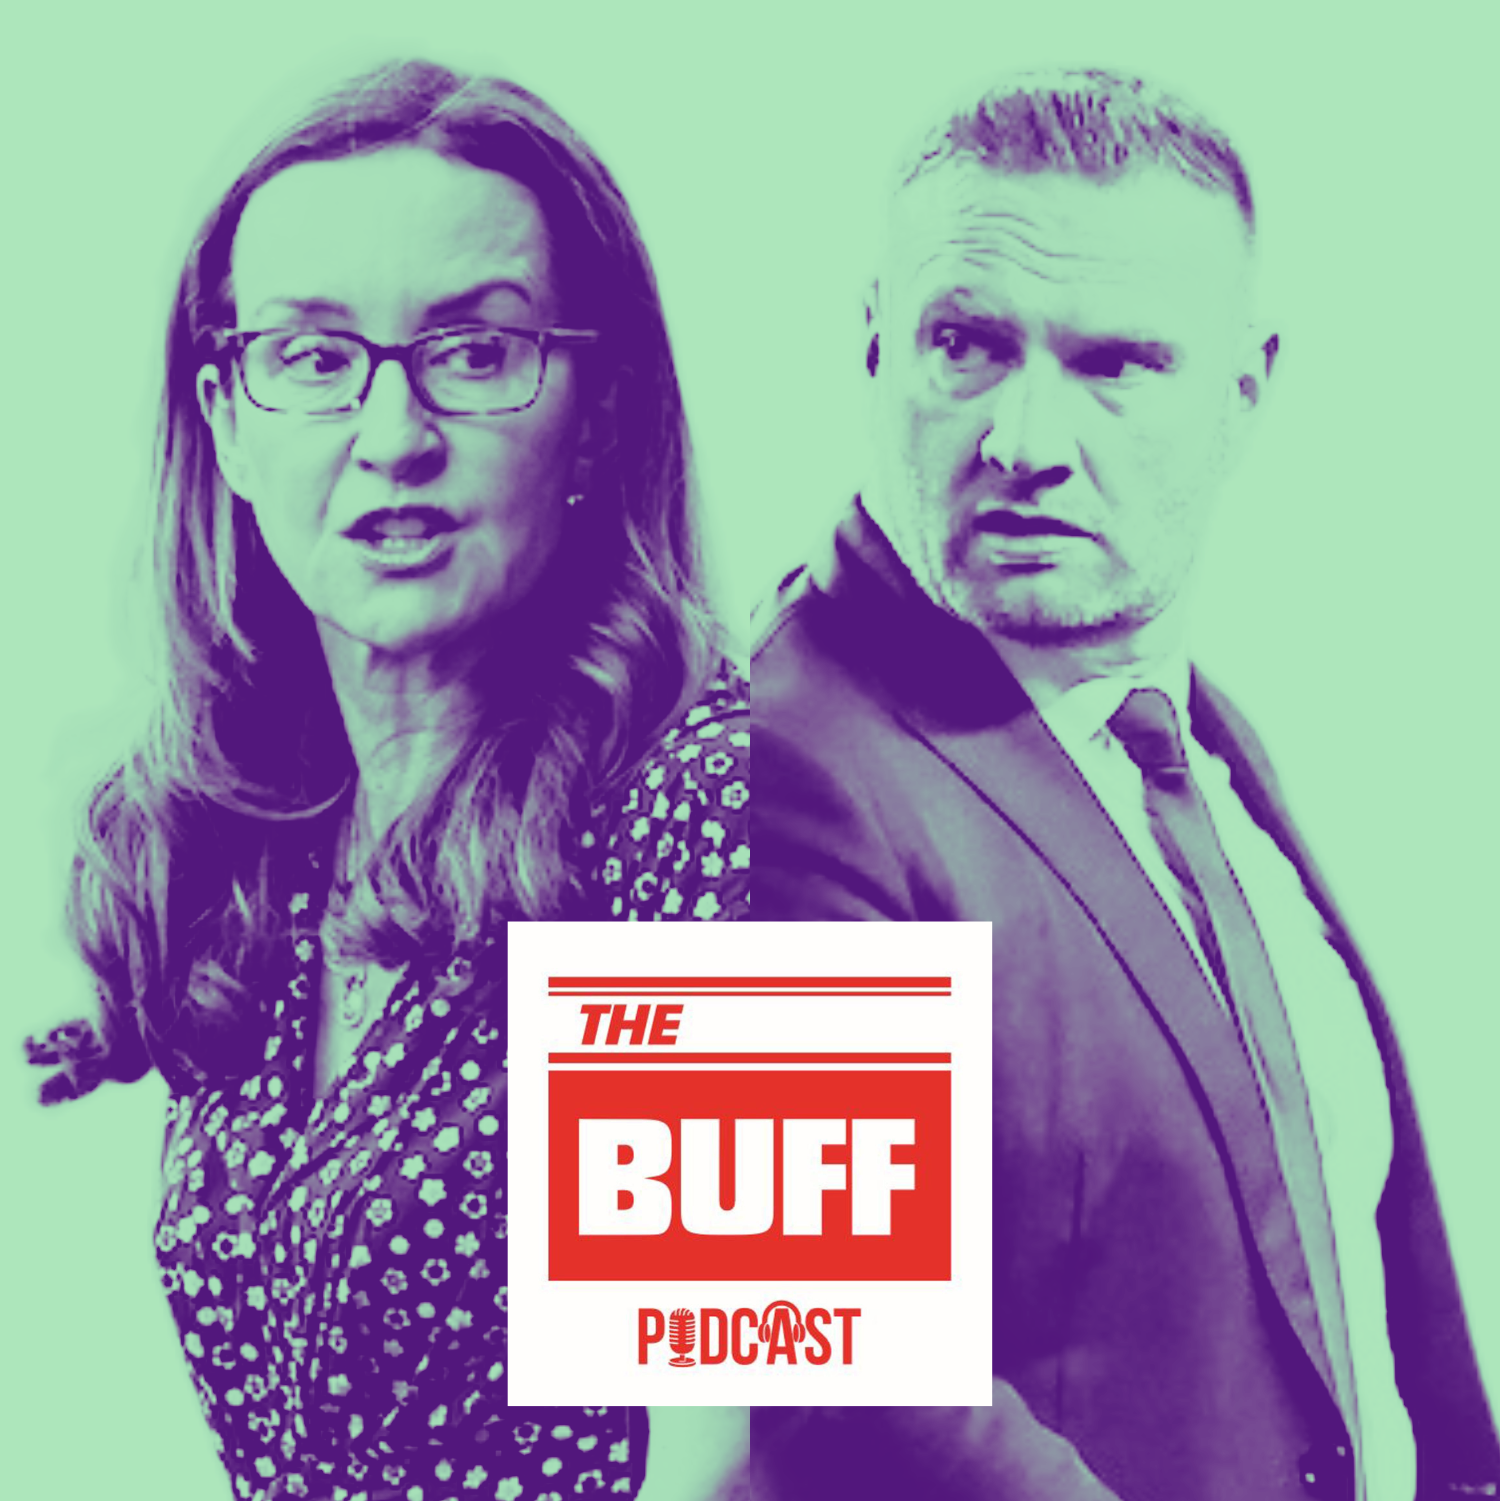 The Buff presents: Sharon's speech and the BWFC rebuilding job